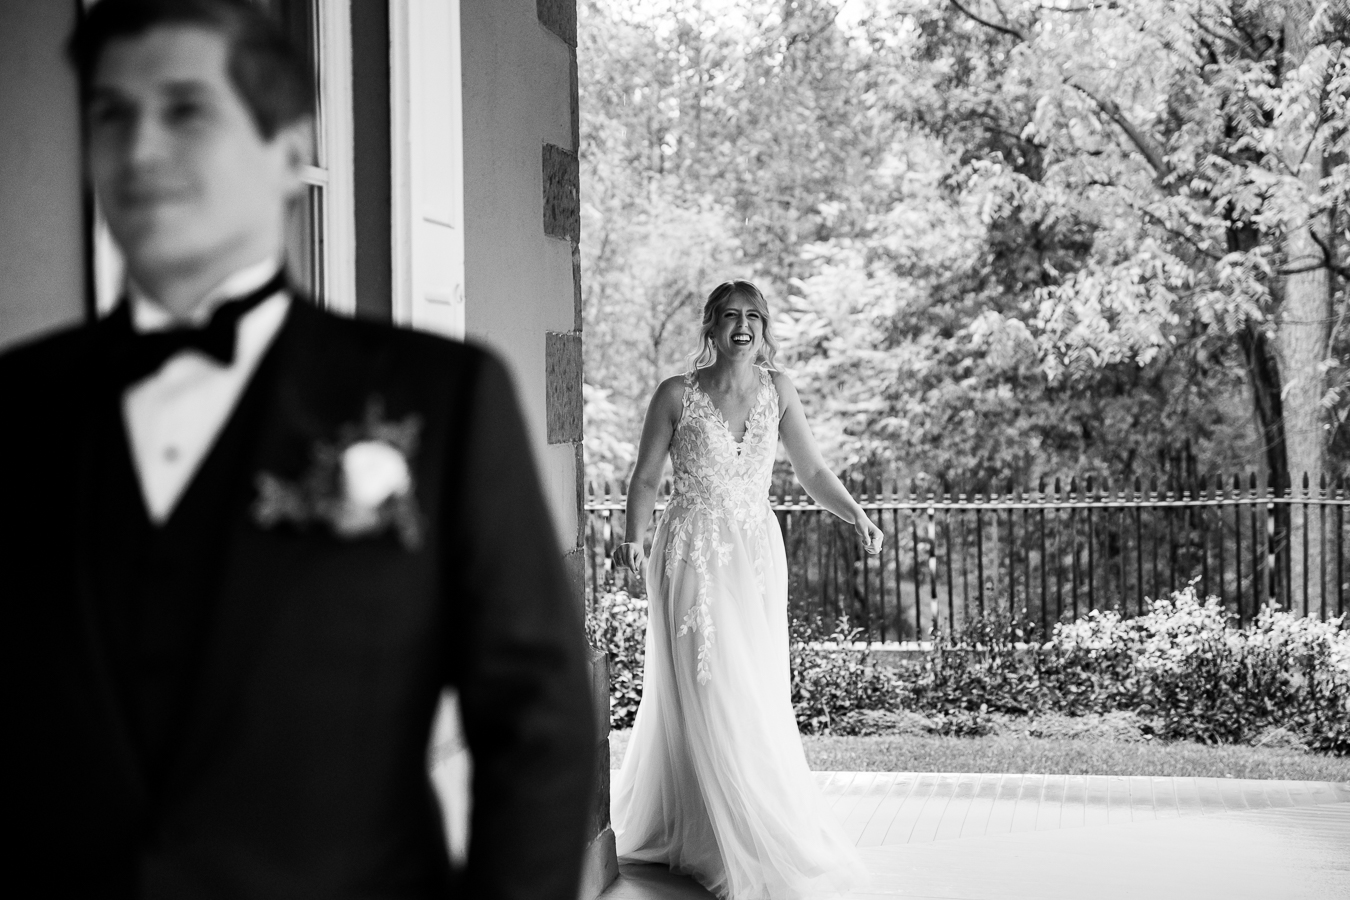 Elizabeth Furnace Wedding photographer, lisa rhinehart, captures this black and white moment as the bride rounds the corner to see the groom for the first time during their first look prior to their ceremony 